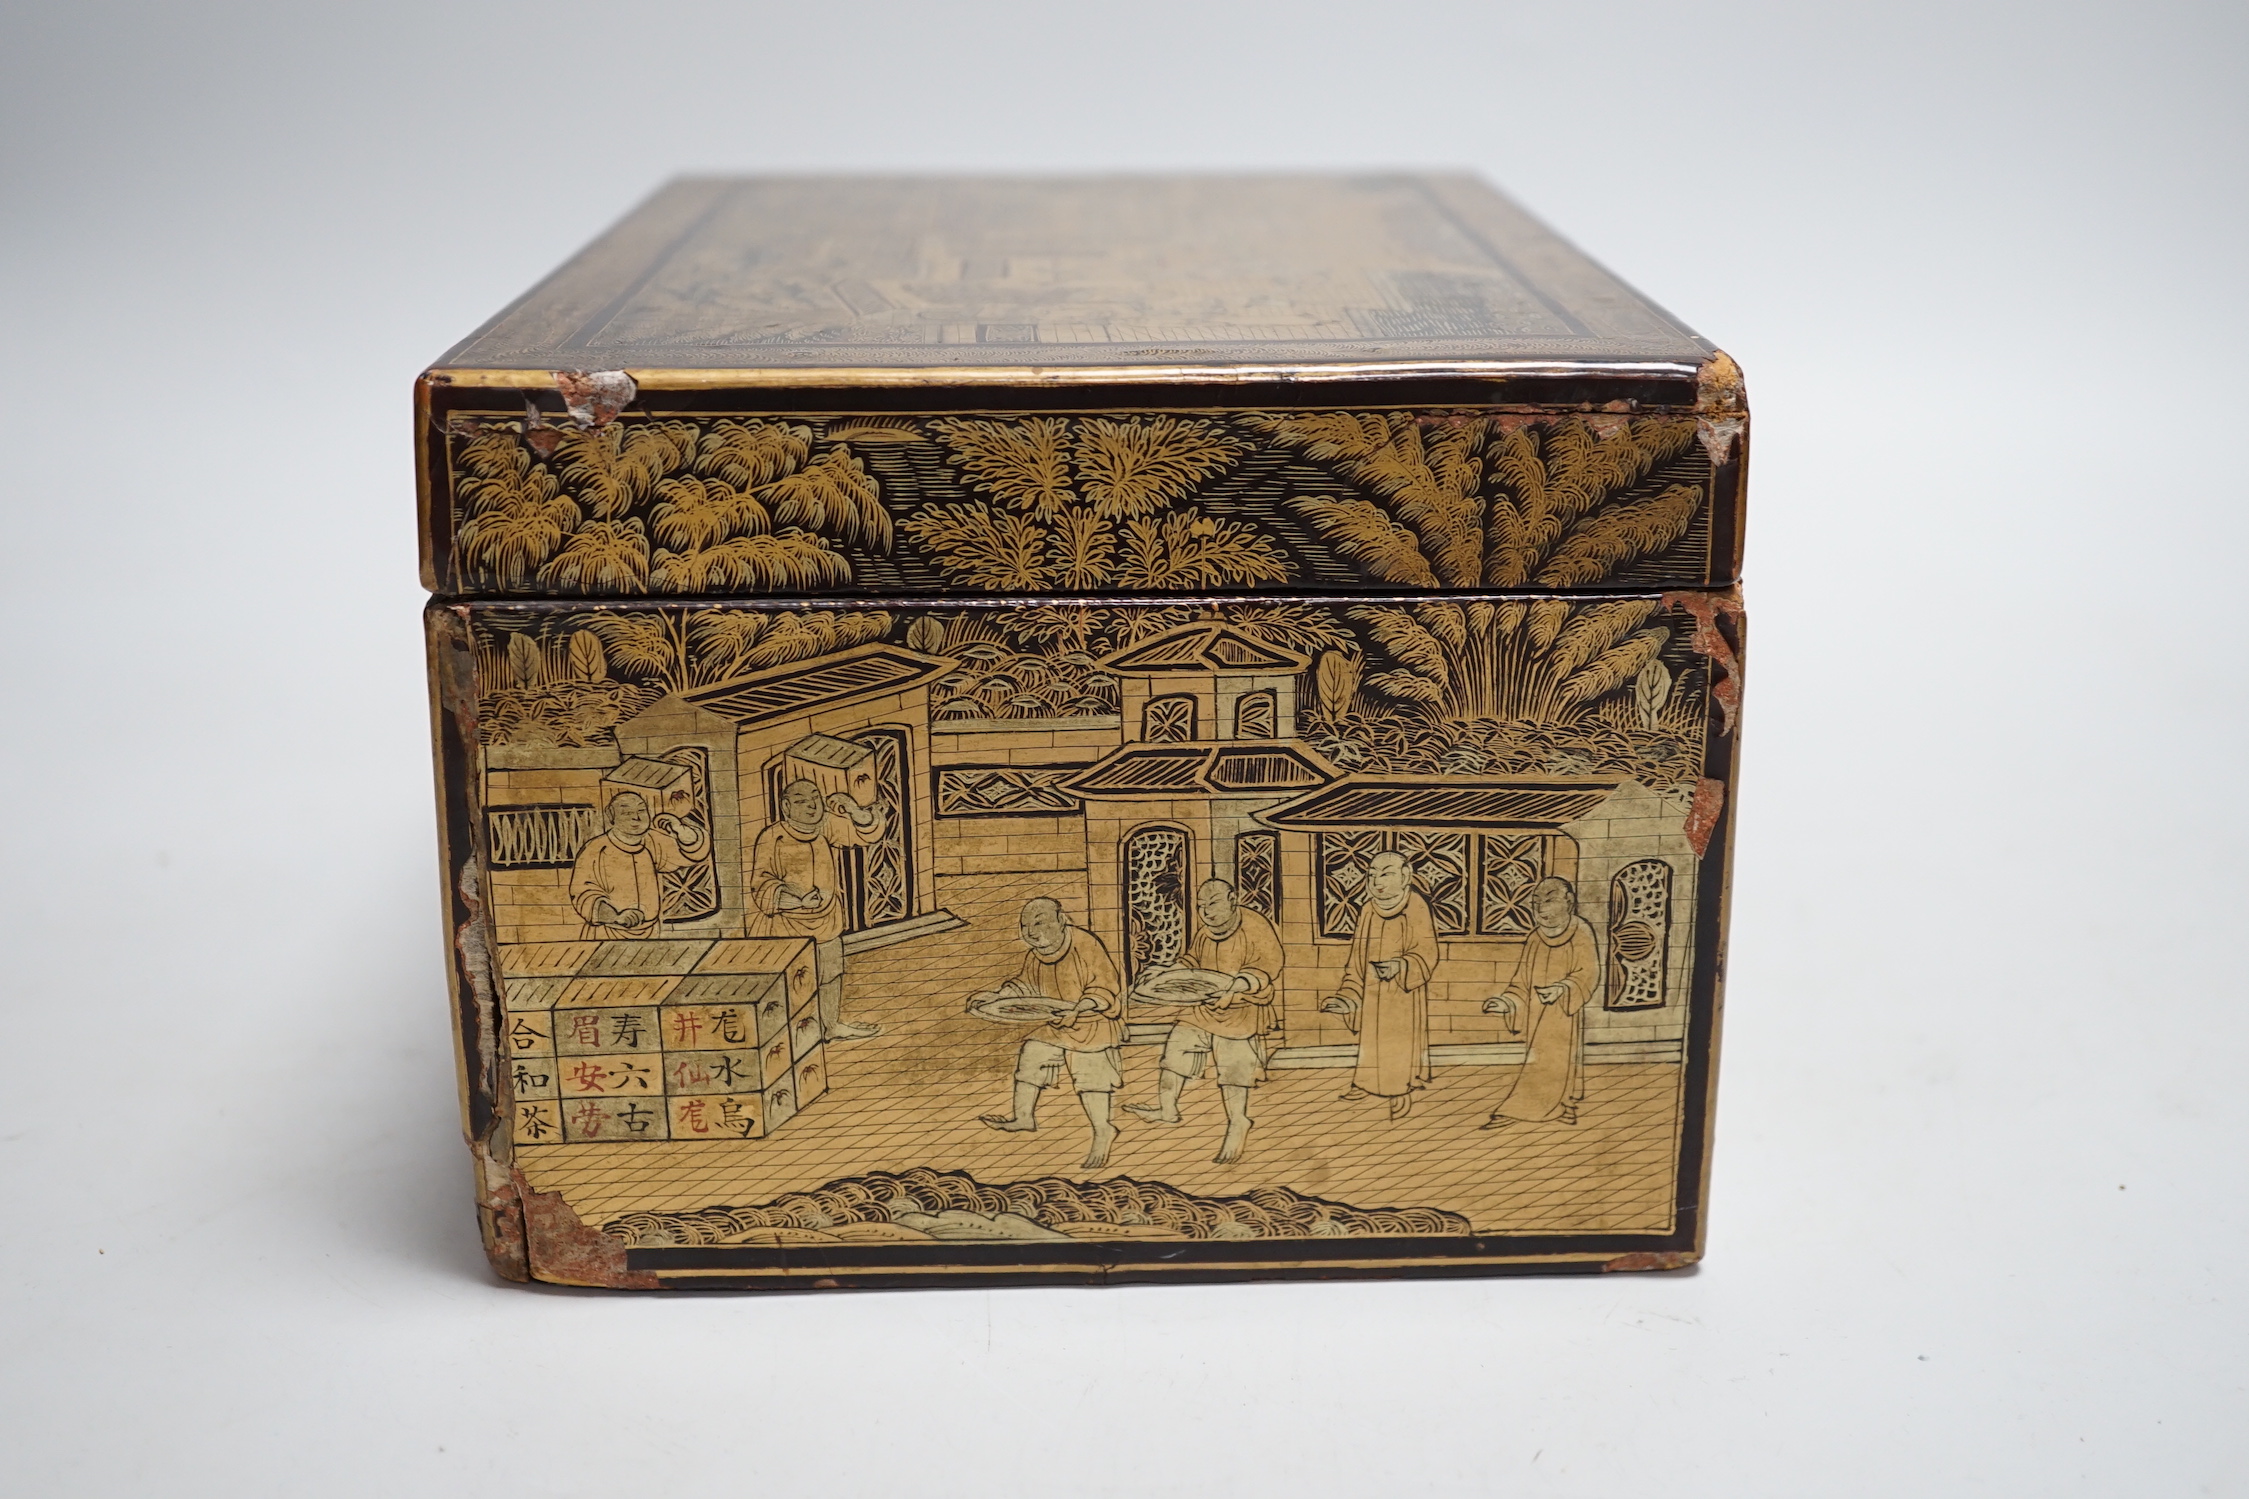 A 19th century Chinese export lacquer tea caddy, black ground with gilt decoration, containing a separate lidded pewter lining box with engraved decoration, 23cm x 16cm x 12cm